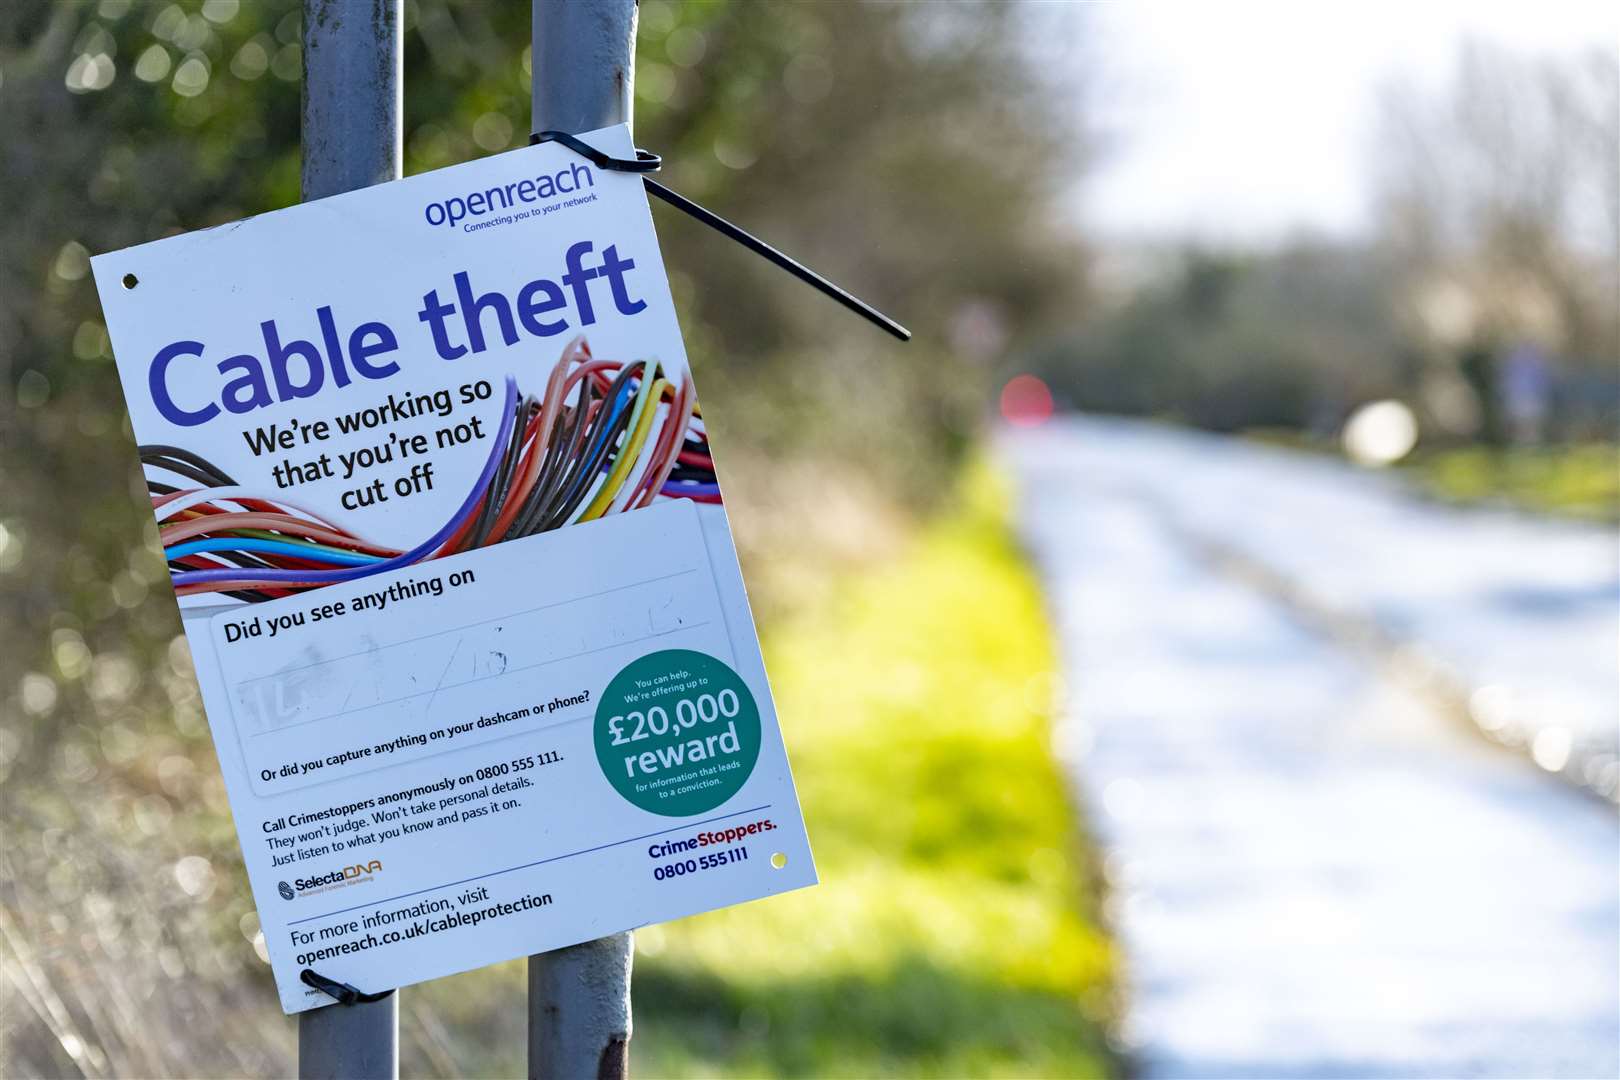 Liverpool City Region: Cable Thefts